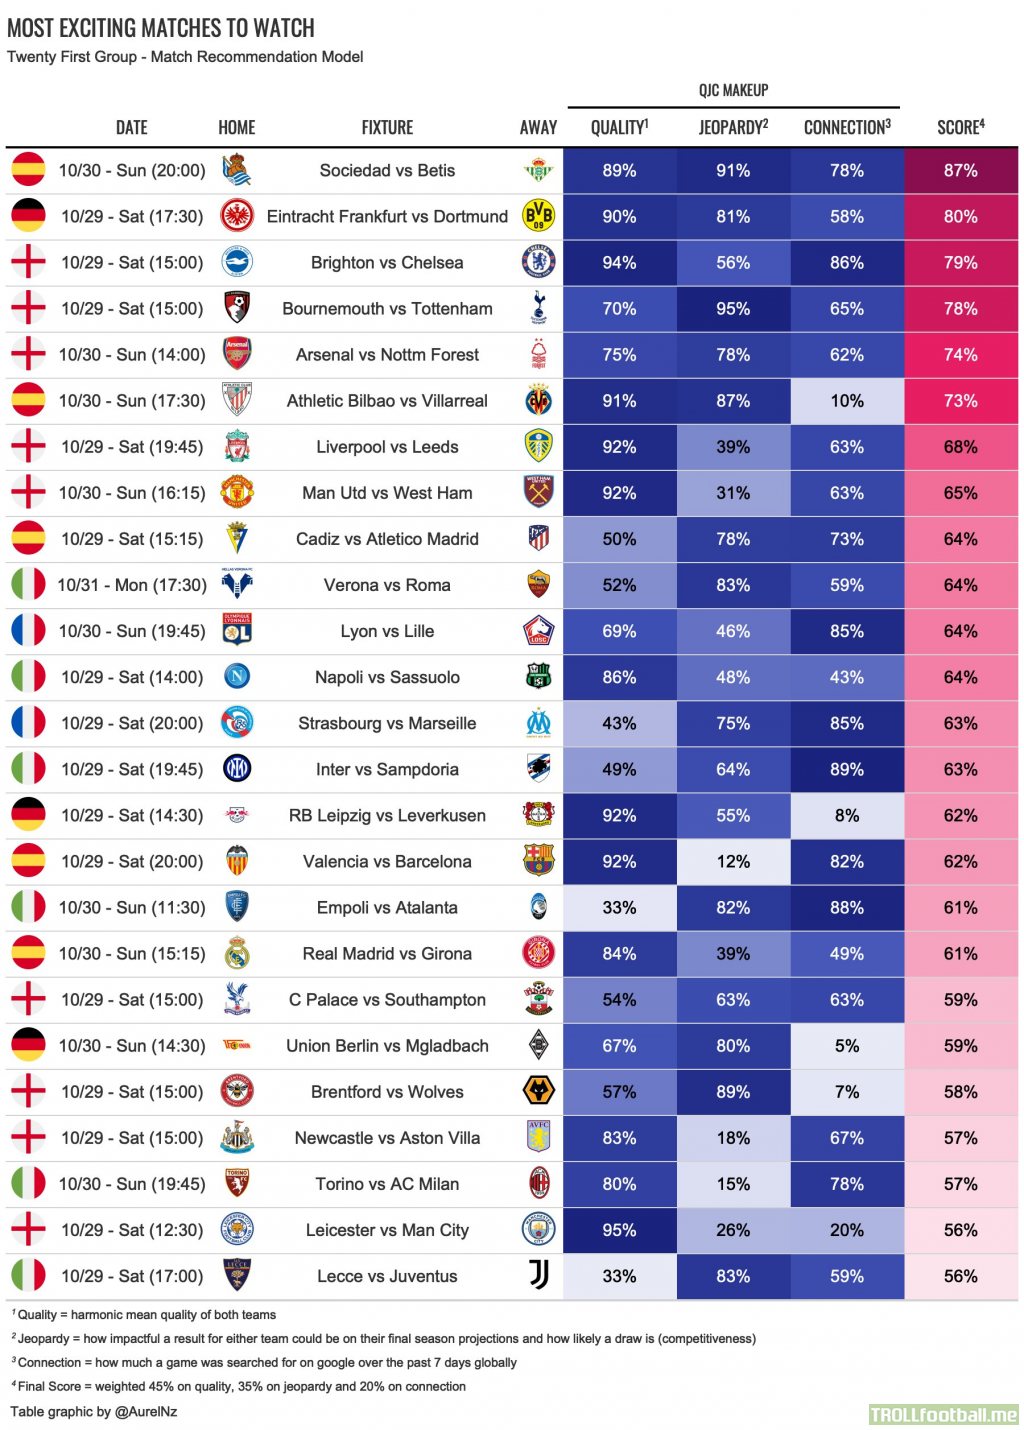 [Aurel Nazmiu] Most exciting matches to watch this weekend, according to the Big 5 leagues "Match Recommendation Model"